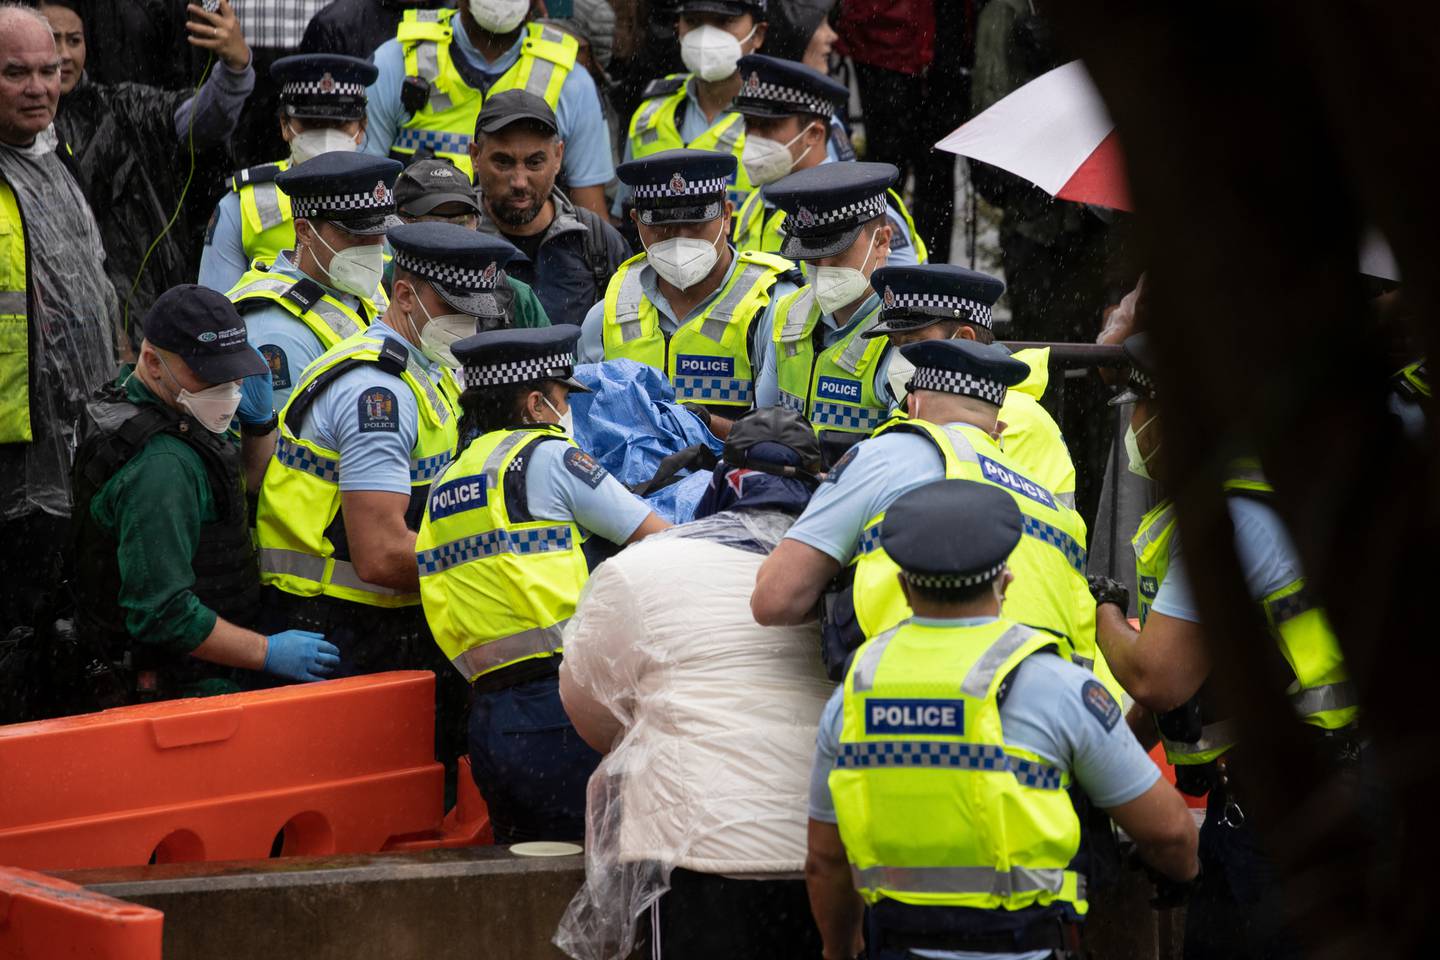 A person is carried out on a stretcher from the protest at Parliament. Photo / George Heard